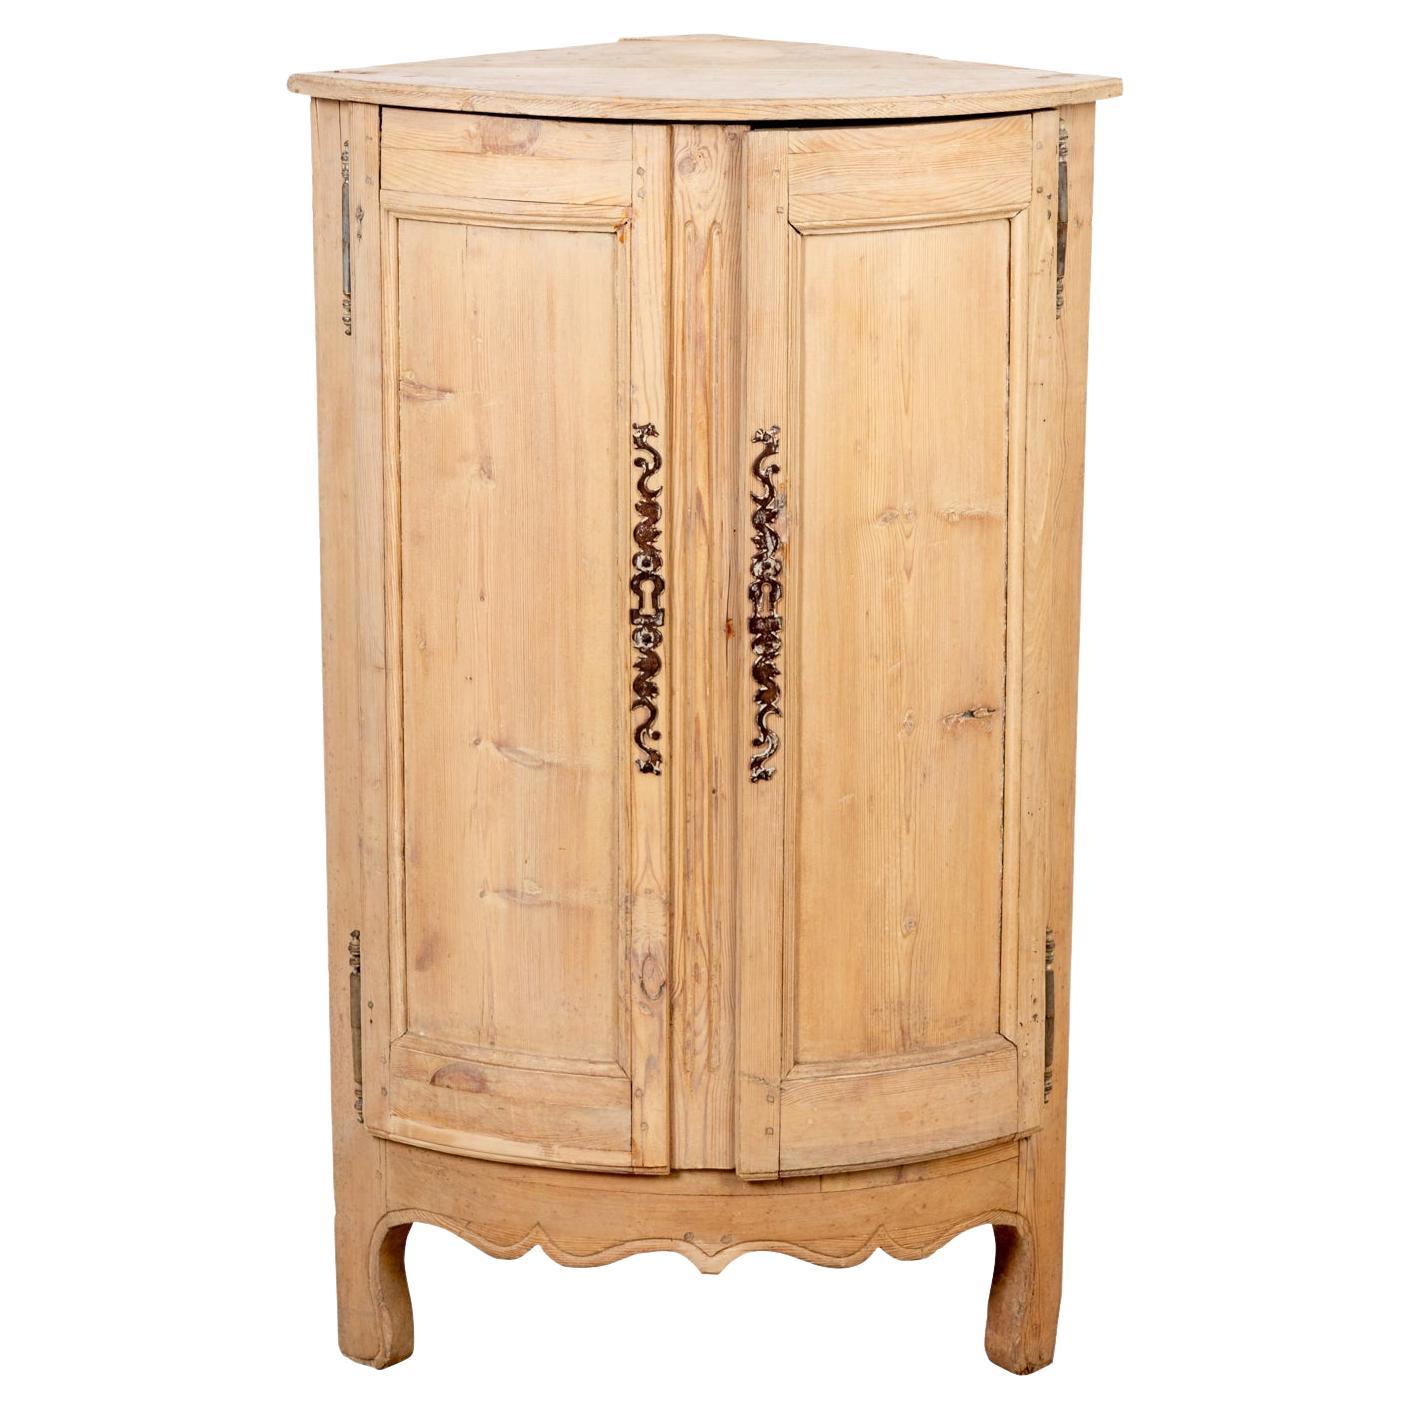 Mid-19th Century French Pine Corner Cabinet For Sale